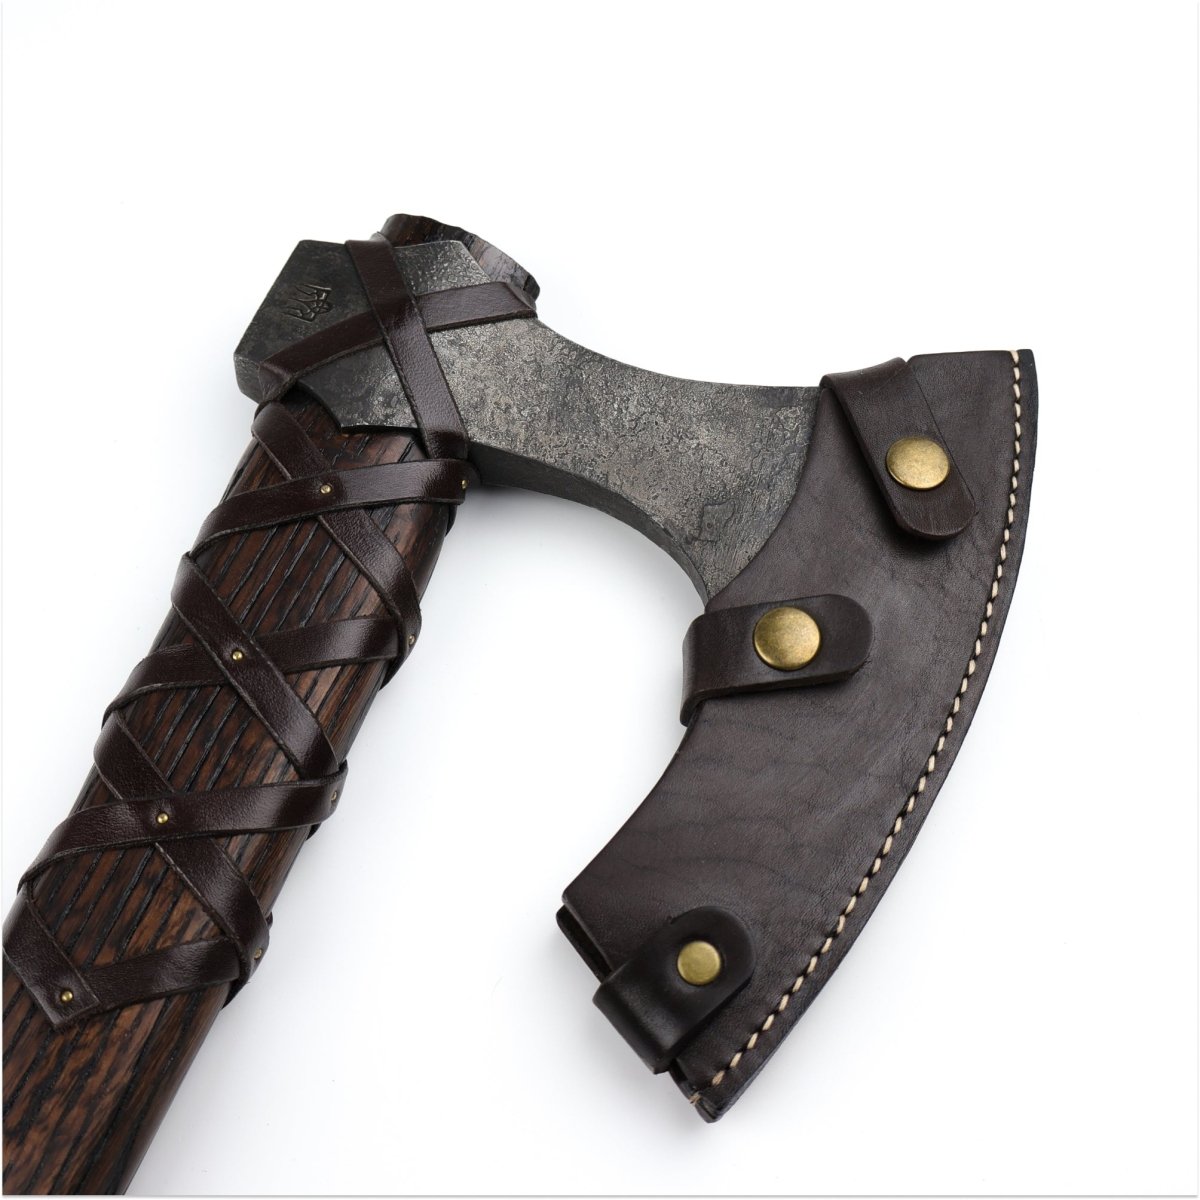 Leather cover for small and standart axe from AncientSmithy